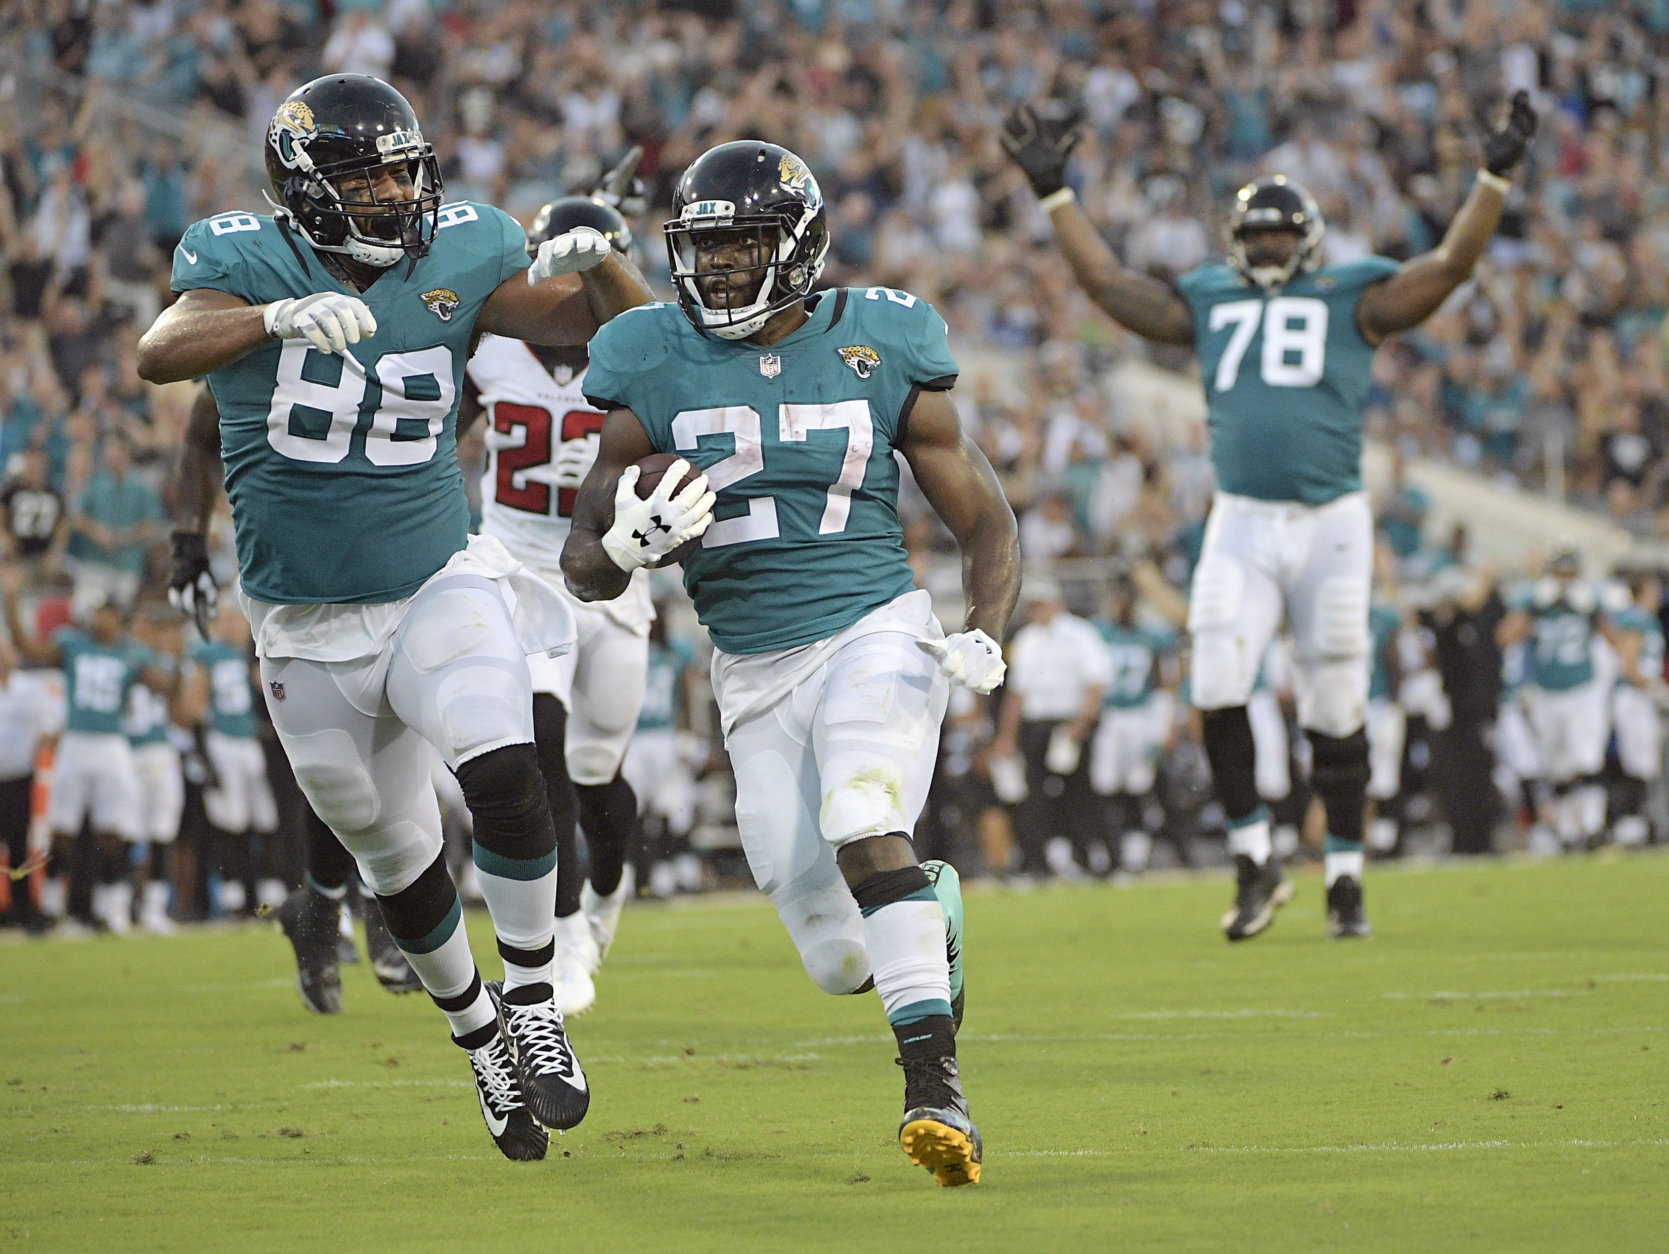 Jacksonville Jaguars running back Leonard Fournette (27) runs for a 21-yard touchdown against the Atlanta Falcons, next to tight end Austin Seferian-Jenkins (88), as offensive tackle Jermey Parnell (78) signals the score during the first half of an NFL preseason football game Saturday, Aug. 25, 2018, in Jacksonville, Fla. (AP Photo/Phelan M. Ebenhack)